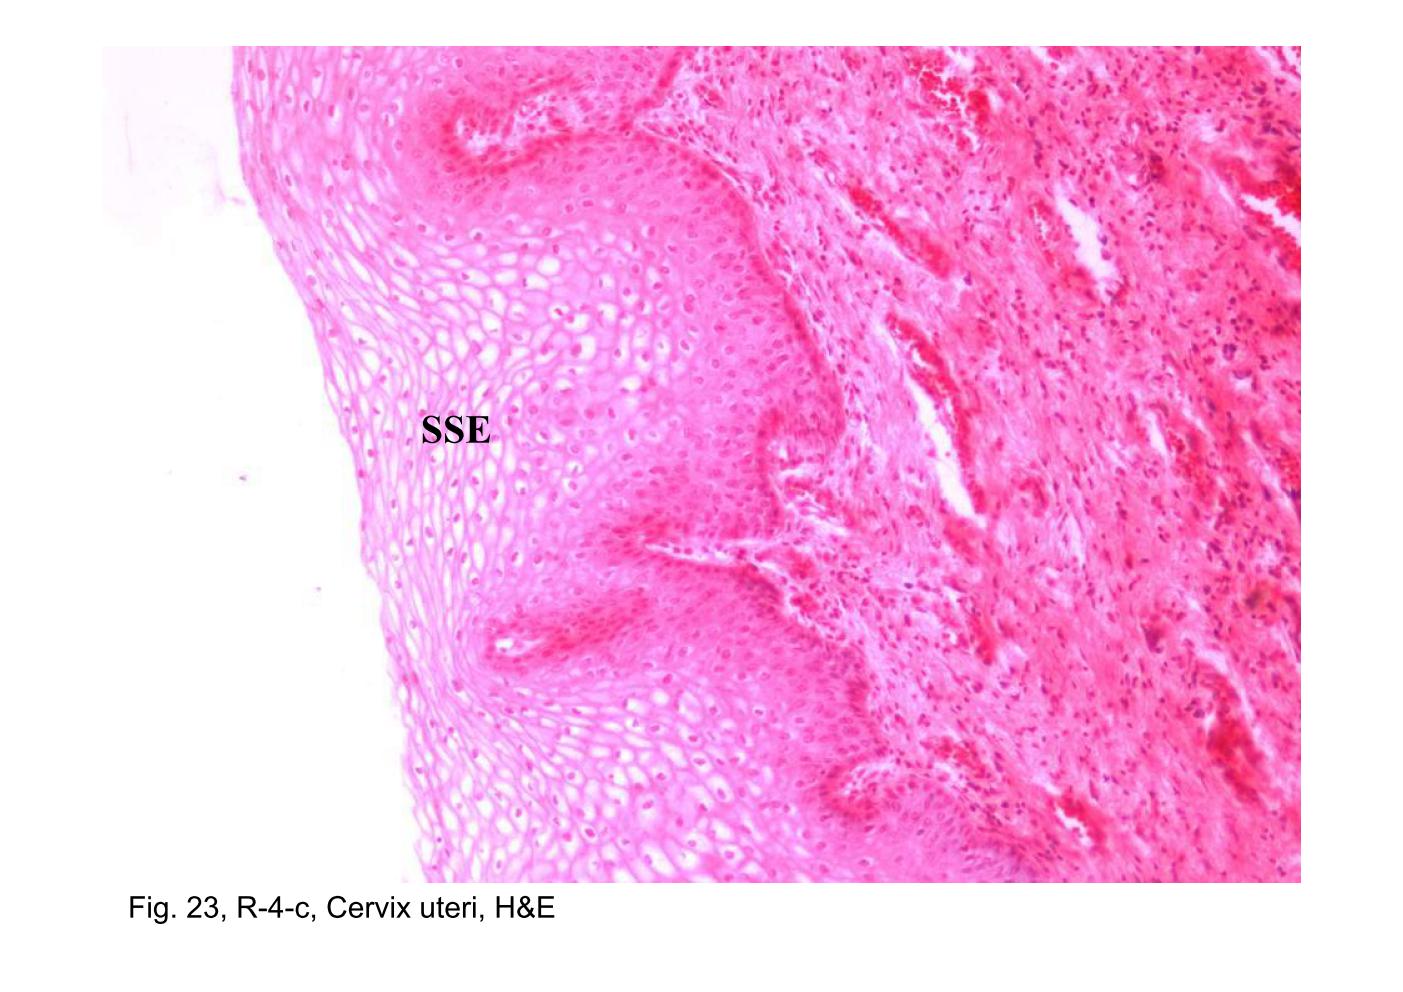 block14_45.jpg - Fig. 23, R-4-c, Cervix uteri, H&EThe surface of the ectocervix is stratified squamous epithelium (SSE). The epithelium-connective tissue junction presents a relatively even contour in contrast to the irregular profile seen in the vagina. In other respects, the epithelium has the same general features as the vaginal epithelium. The mucosa of the ectocervix, like that of the vagina, is devoid of glands.